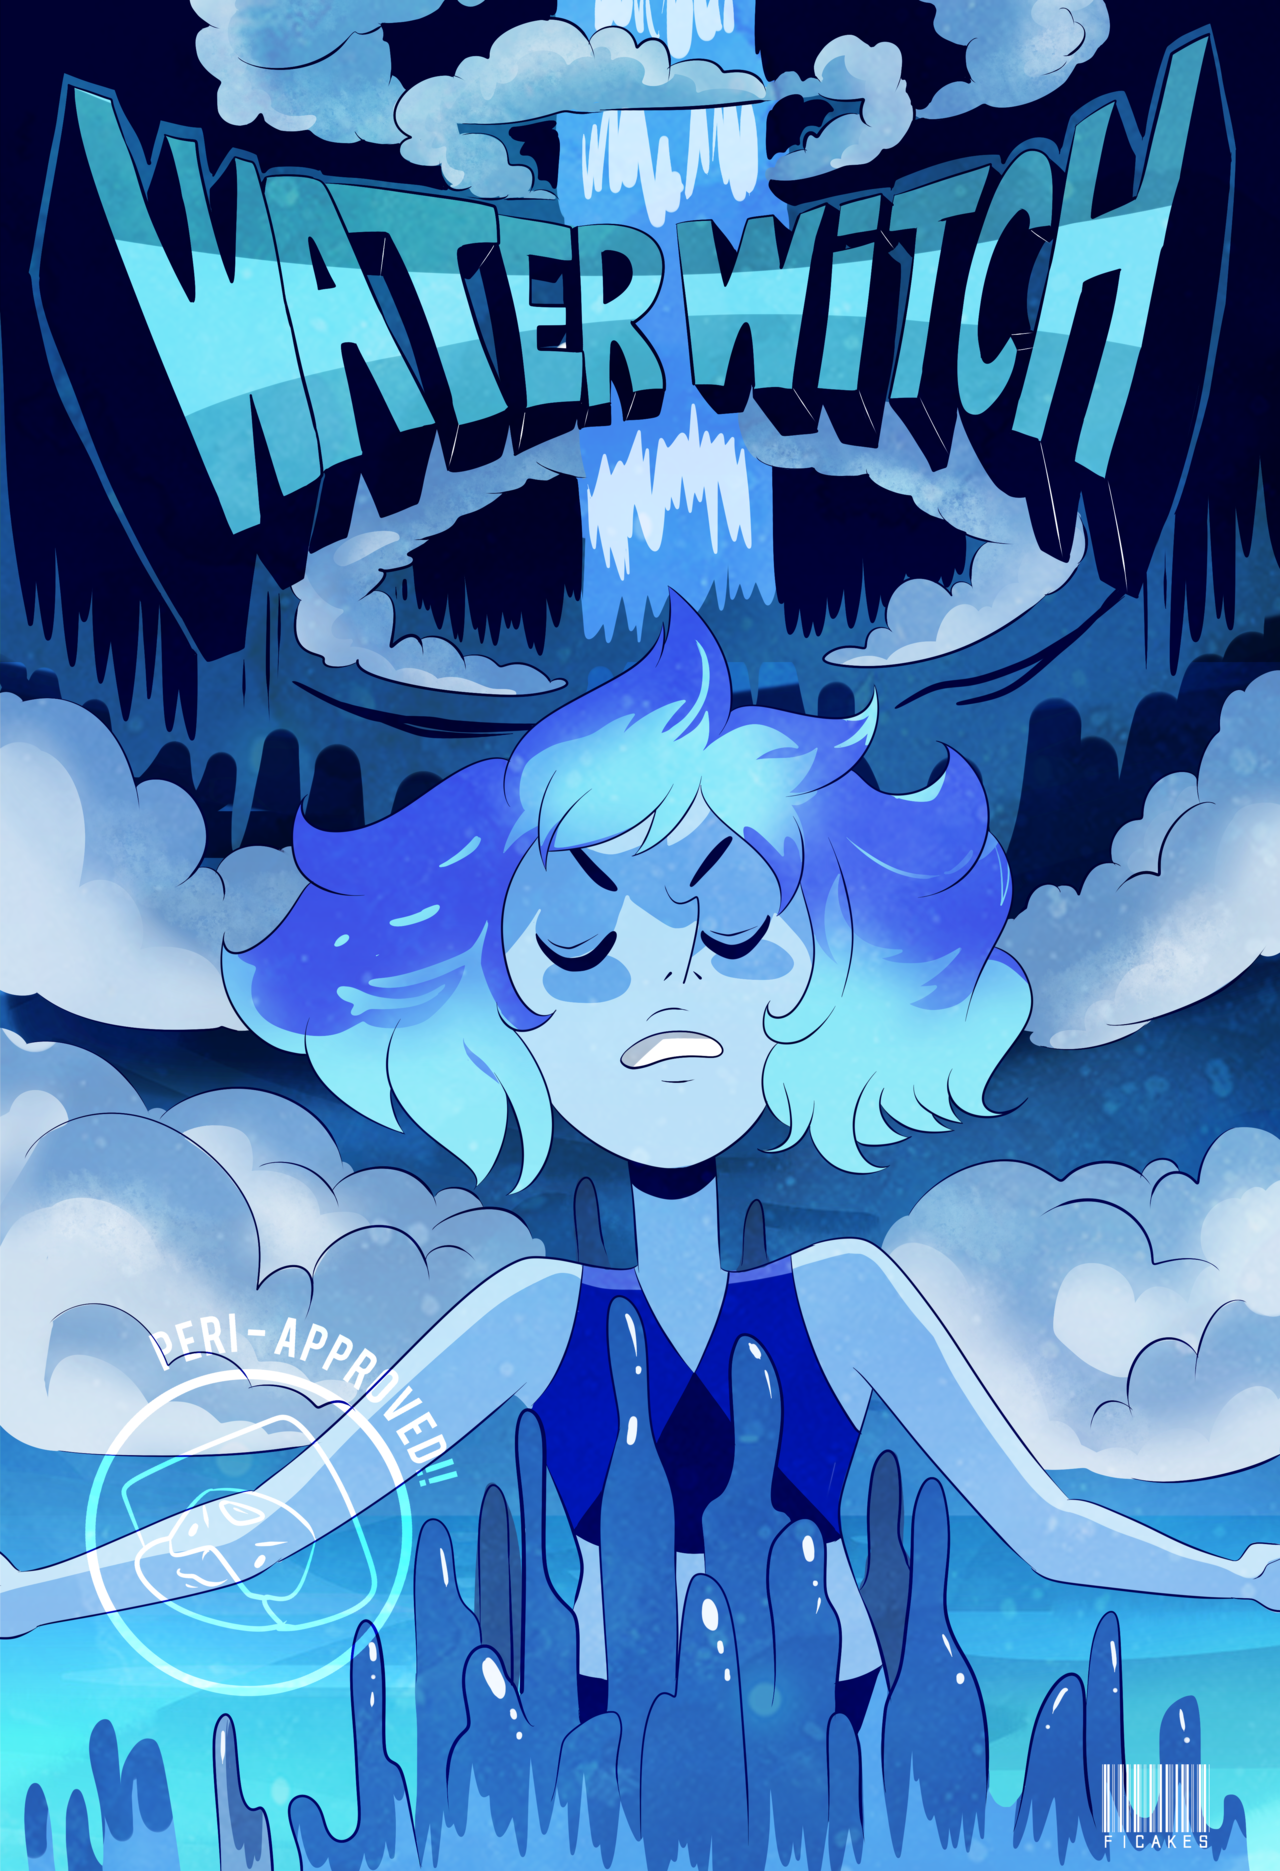 I did my own re-endition of the water witch poster that Greg made for the Lapis Lazuli episode way back in Season 1